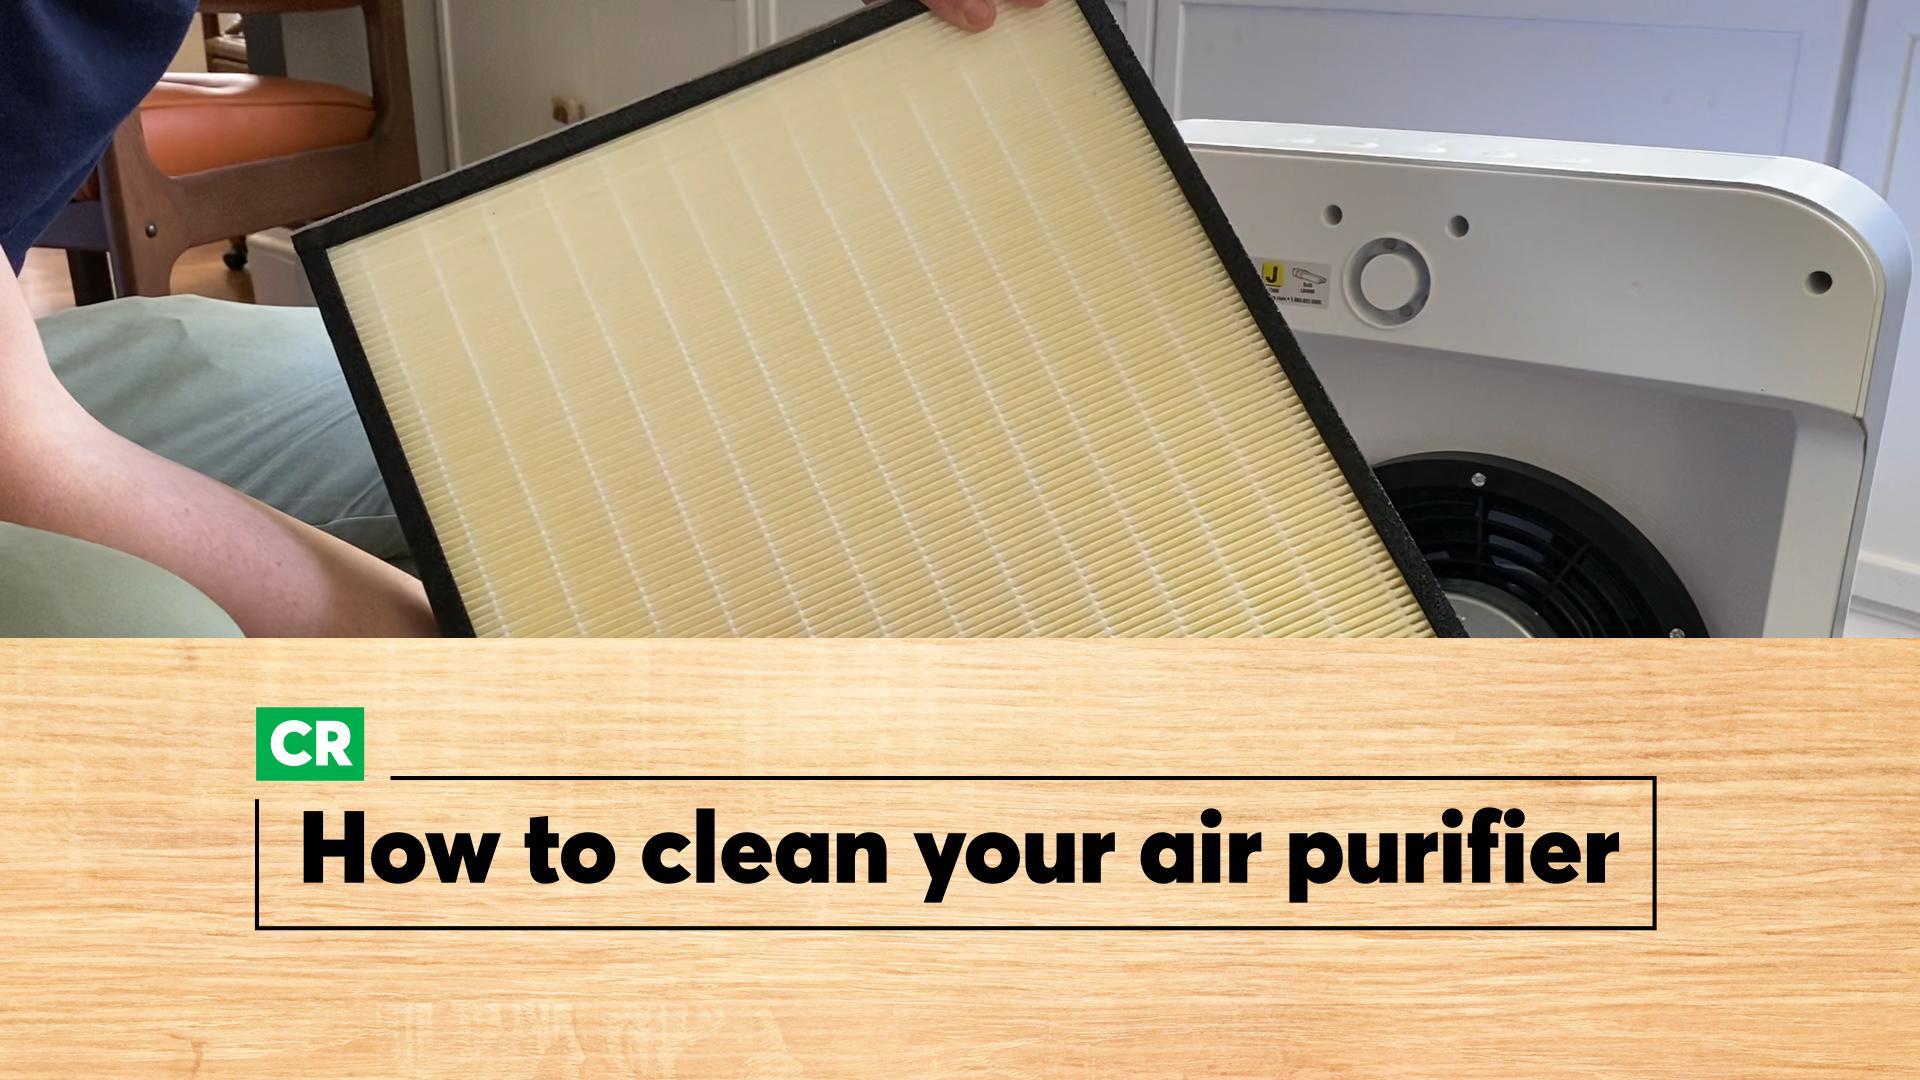 Is an $800 purifier best to clean your home's air? Marketplace tested 5 top  brands and their claims